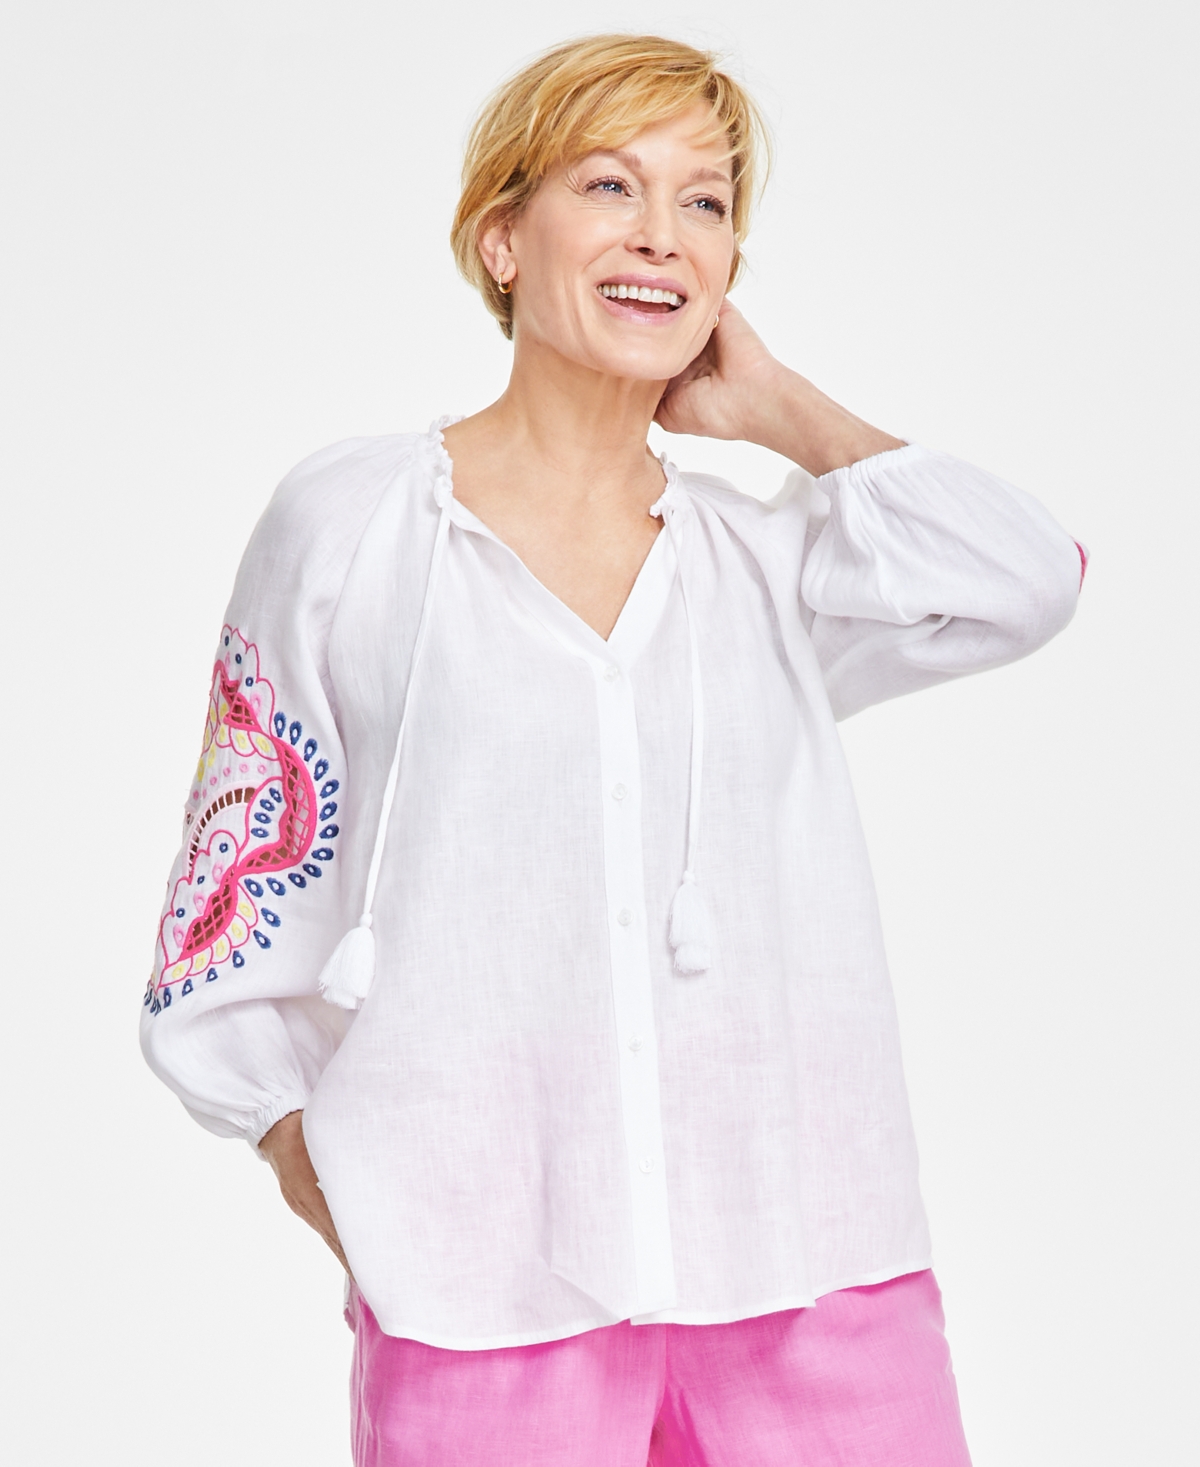 Women's 100% Linen Embroidered-Sleeve Peasant Top, Created for Macy's - Primrose Yellow